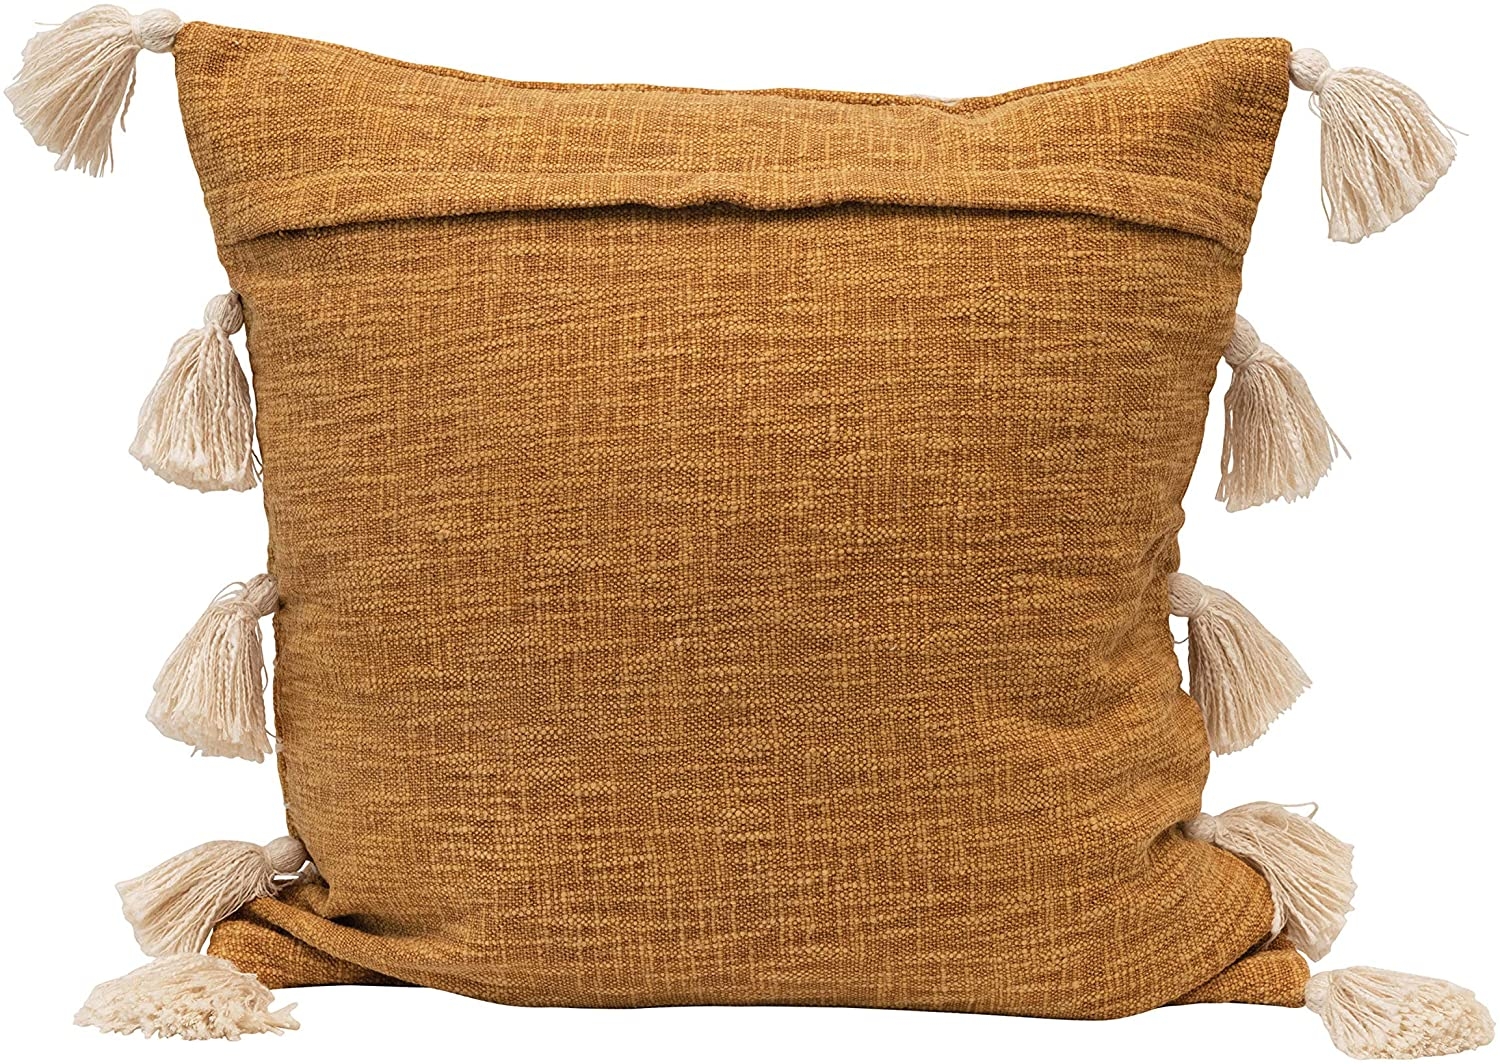 Cotton Woven Pillow with Appliqued Stripes & Tassels, Mustard Color & White - Image 1